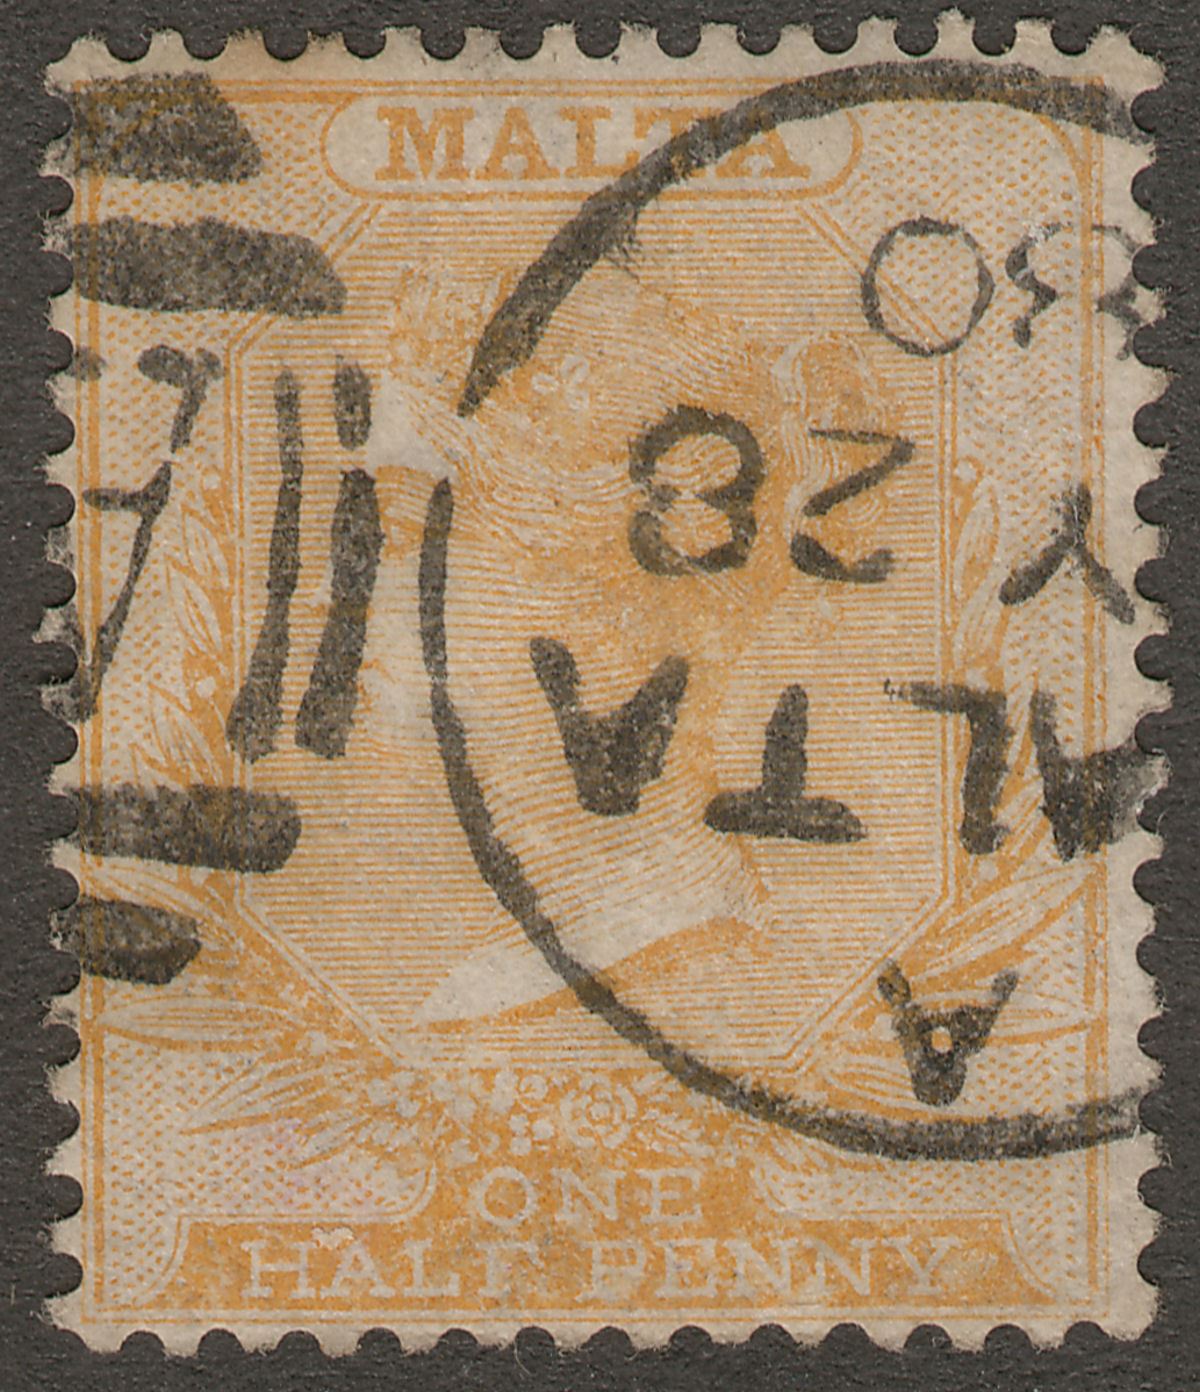 Malta 1880 Queen Victoria ½d Bright Orange-Yellow? p14 Used with CDS Postmark